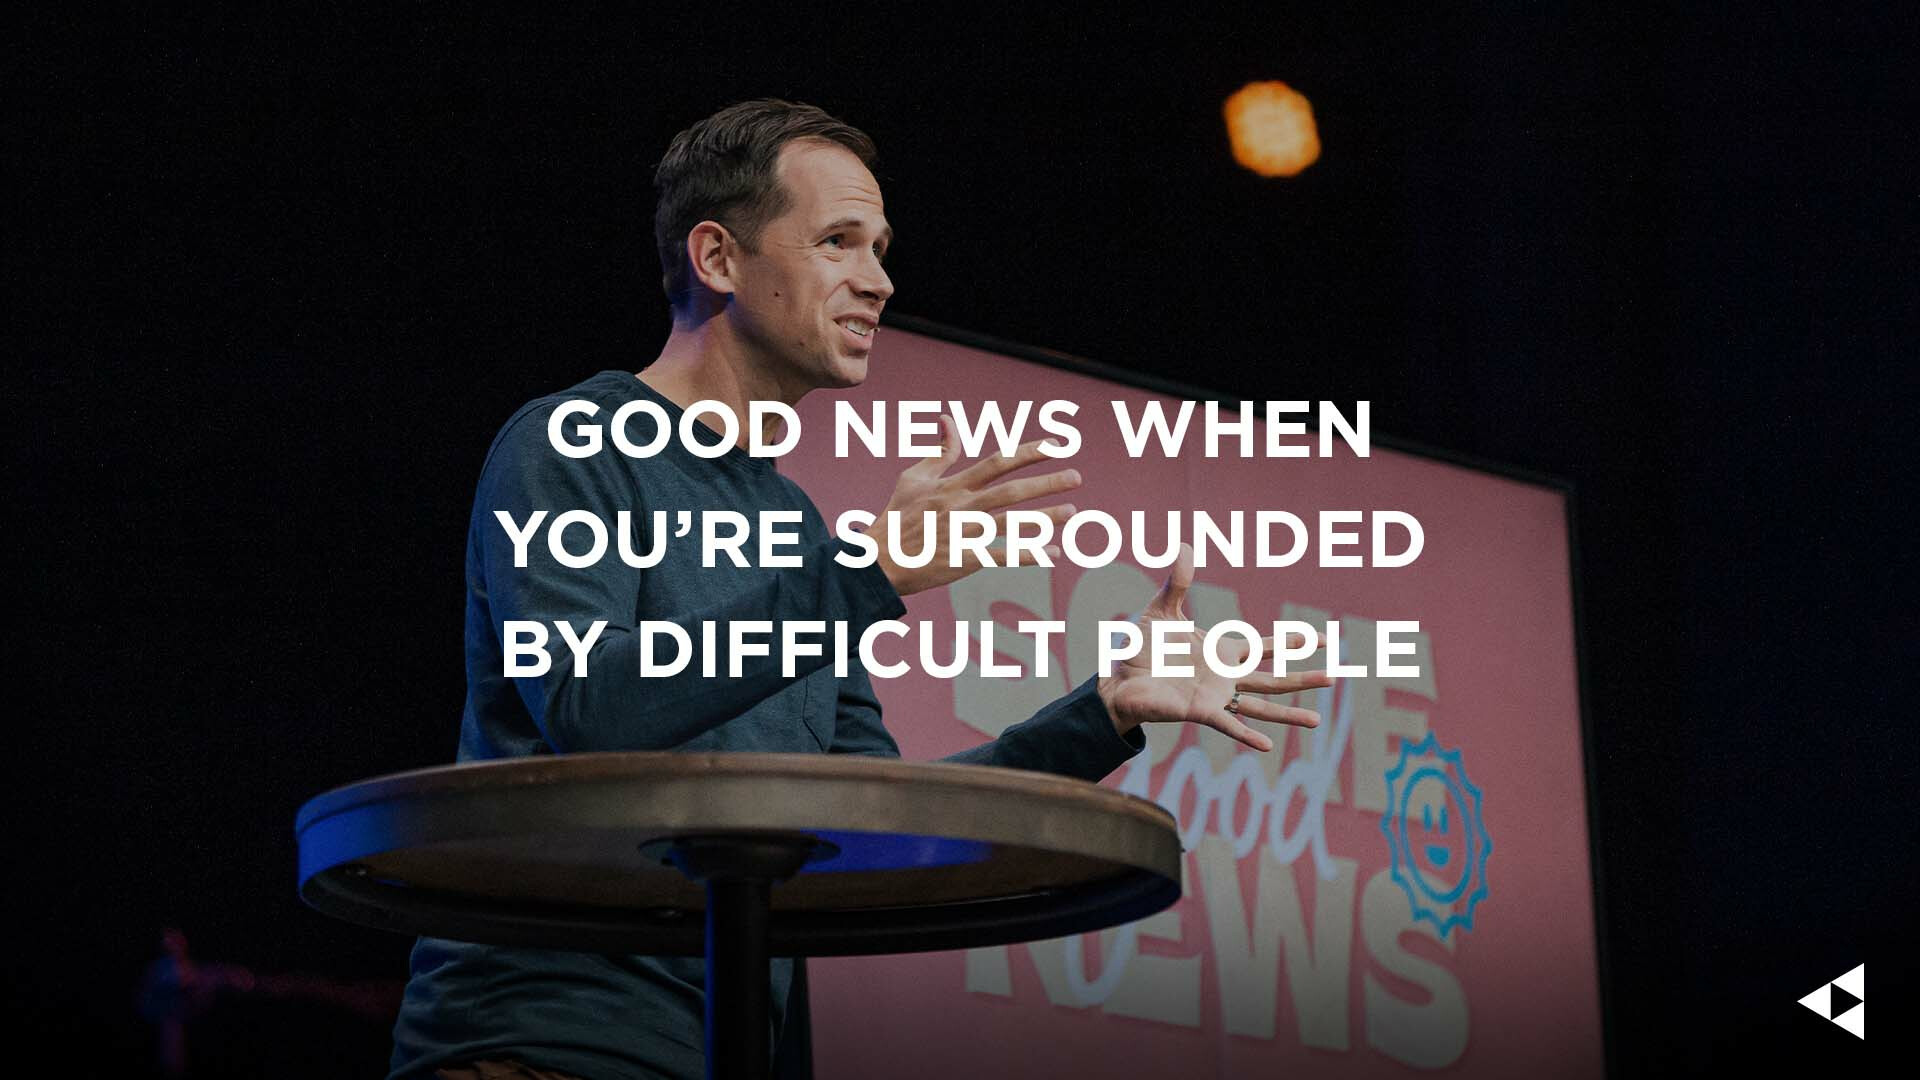 Good News When You're Surrounded by Difficult People